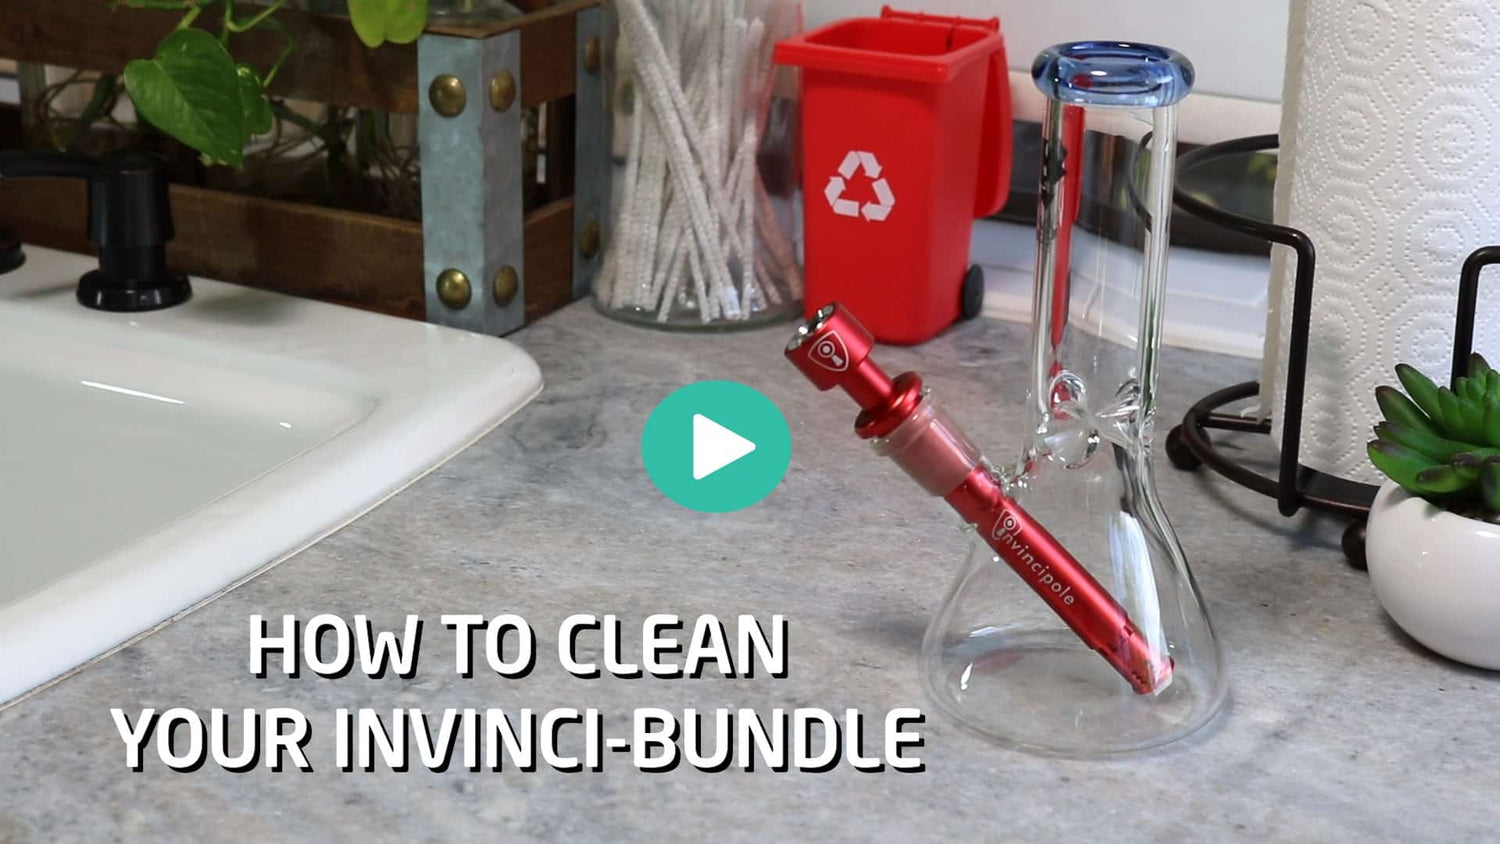 How to clean your Invinci-Bundle